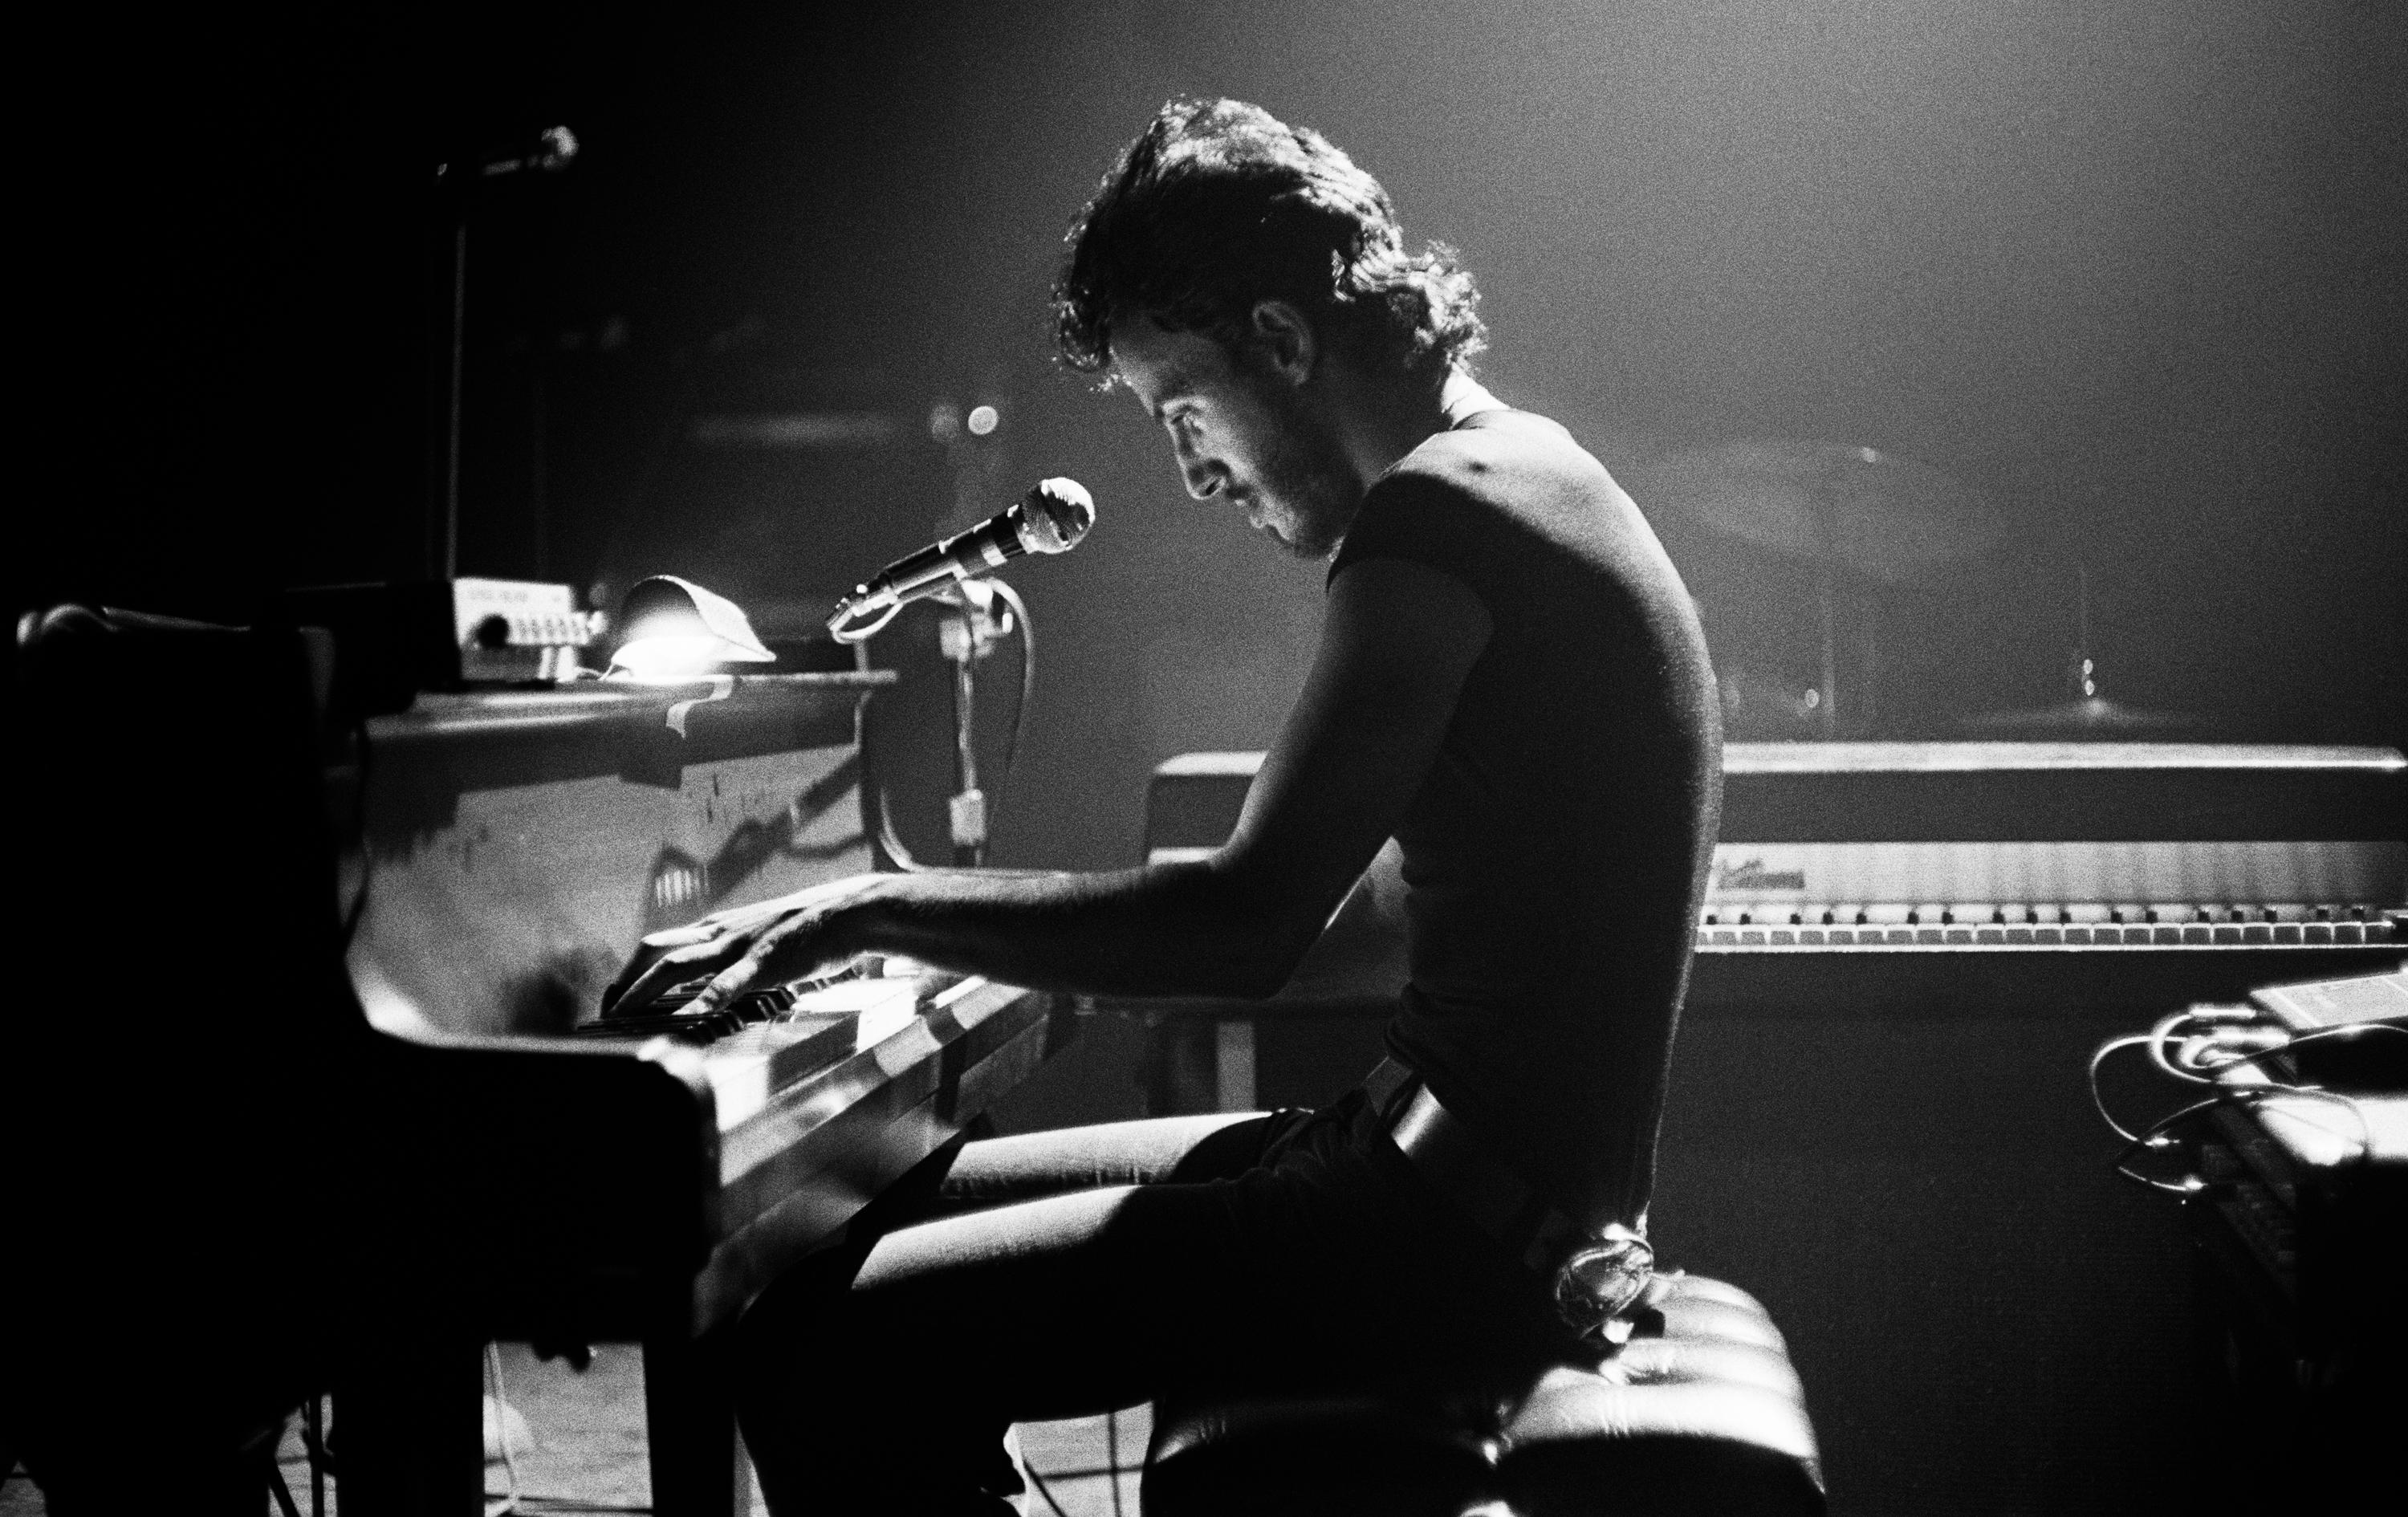 Barry Schneier Portrait Photograph - Bruce Springsteen "For You", Harvard Square Theater 1974. Printers proof print